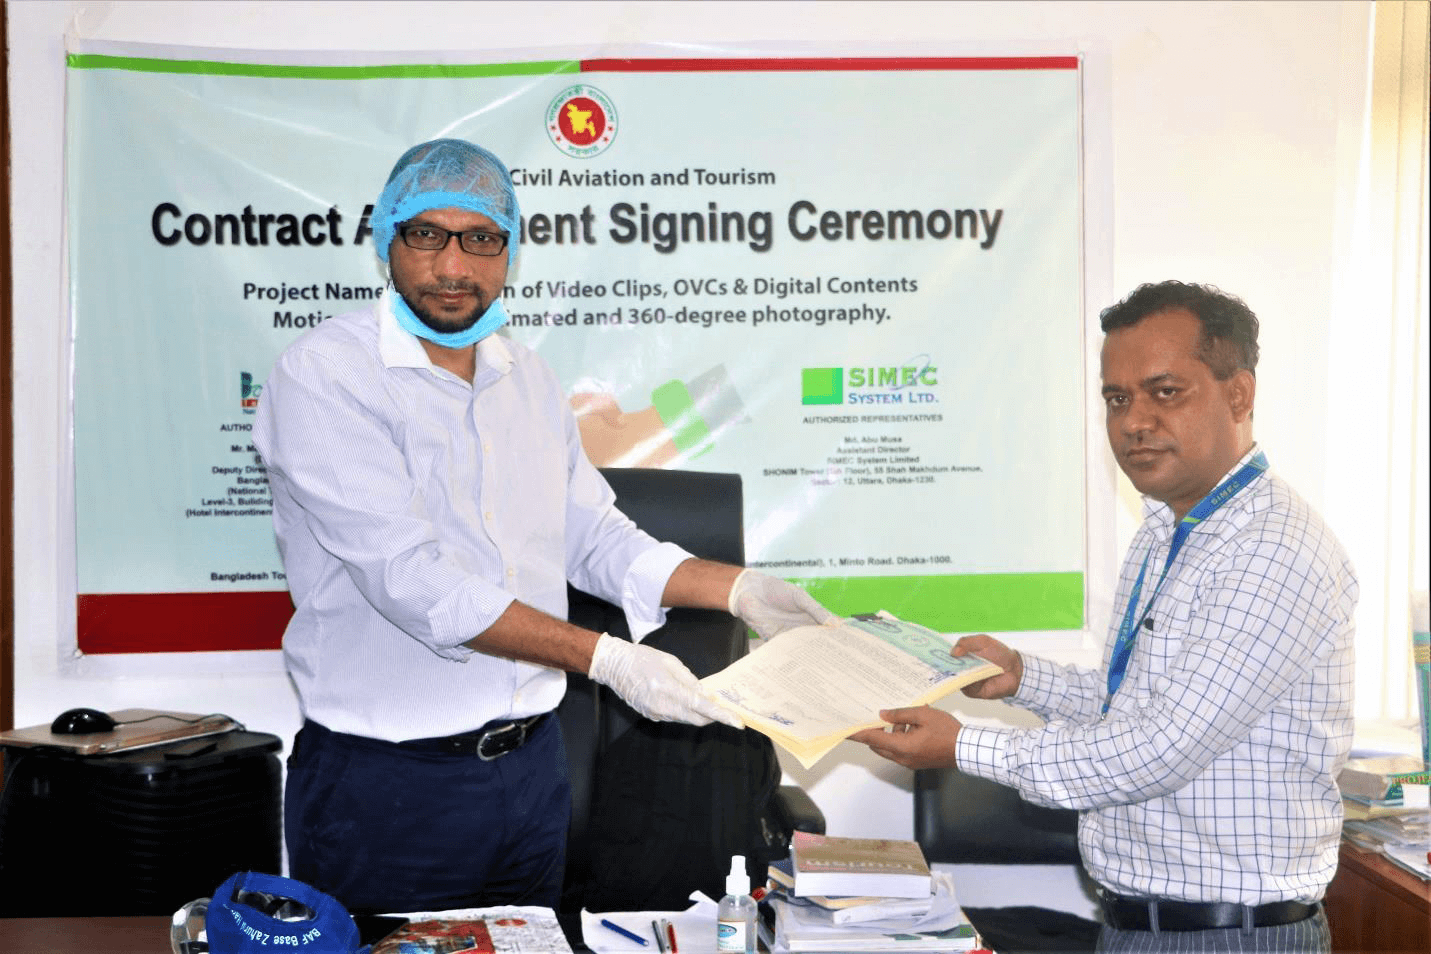 Contract Signing Ceremony